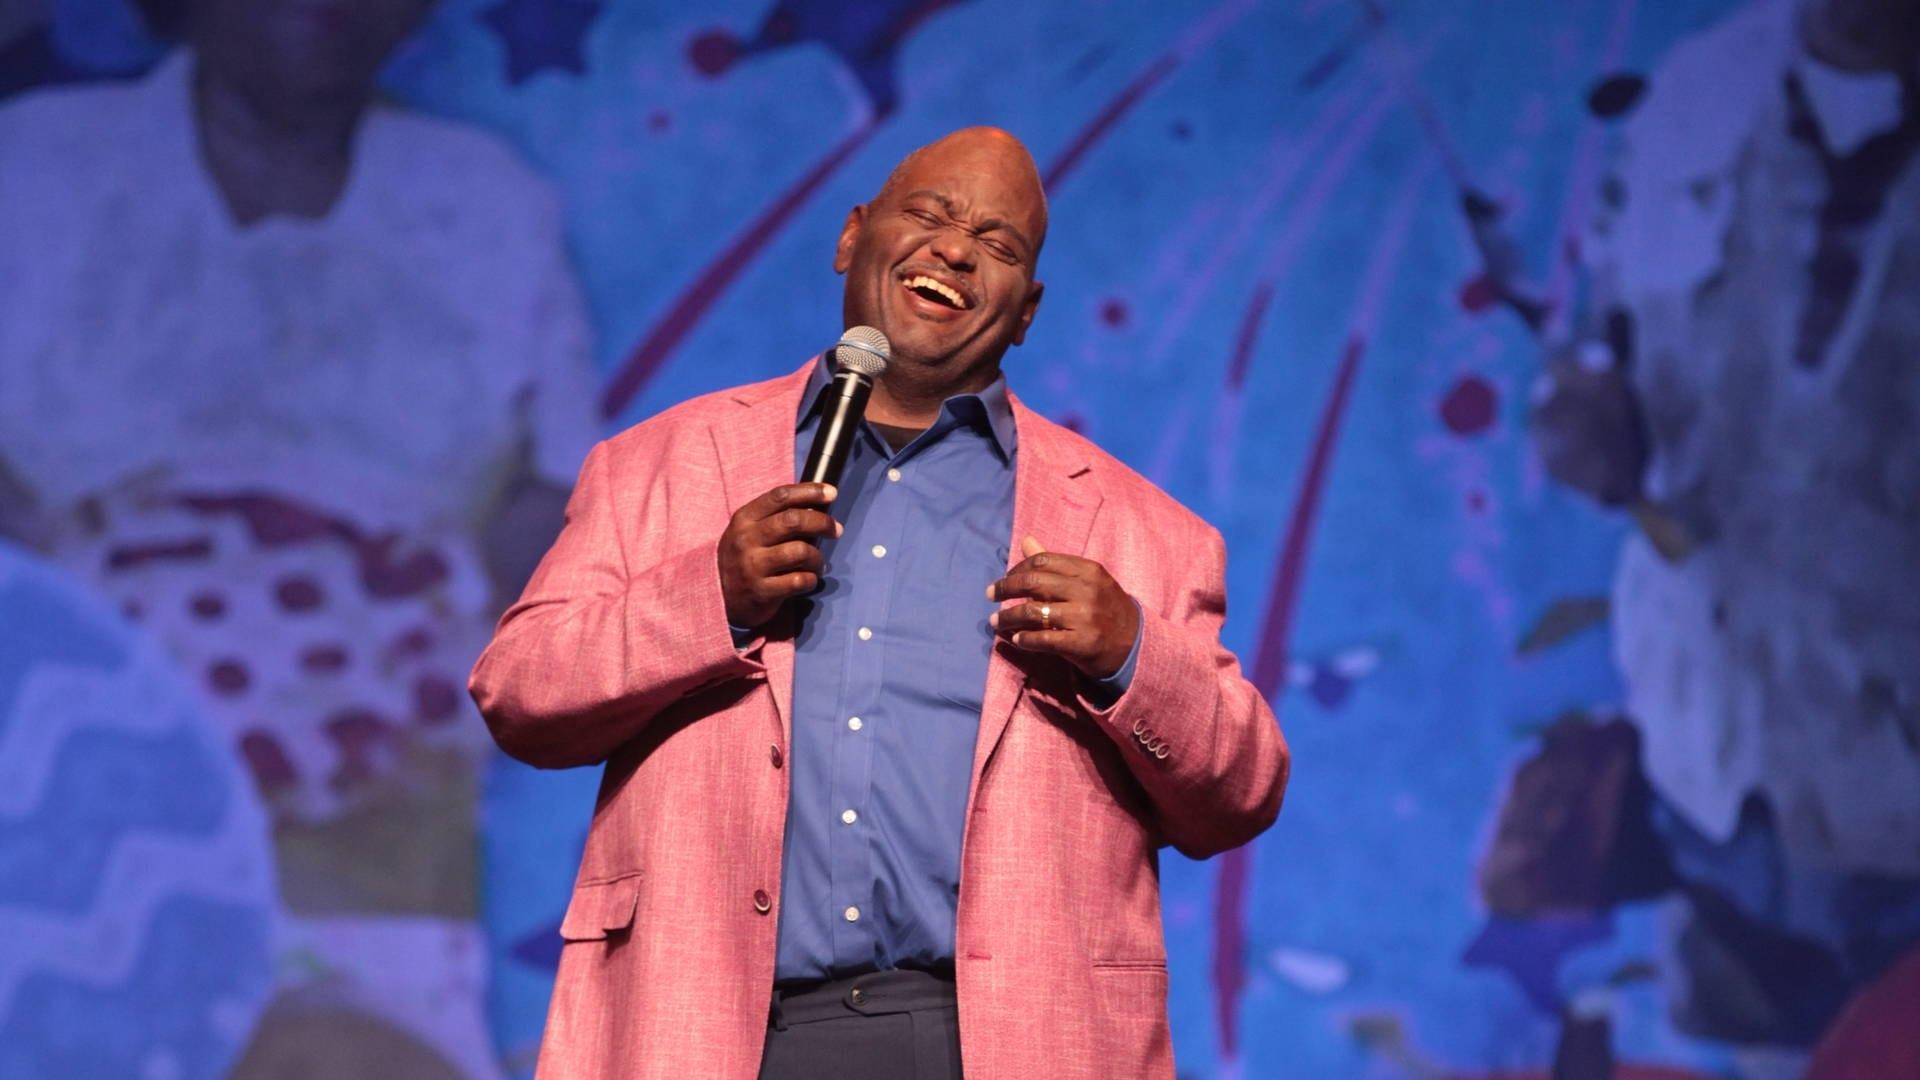 Lavell Crawford: Home for the Holidays backdrop